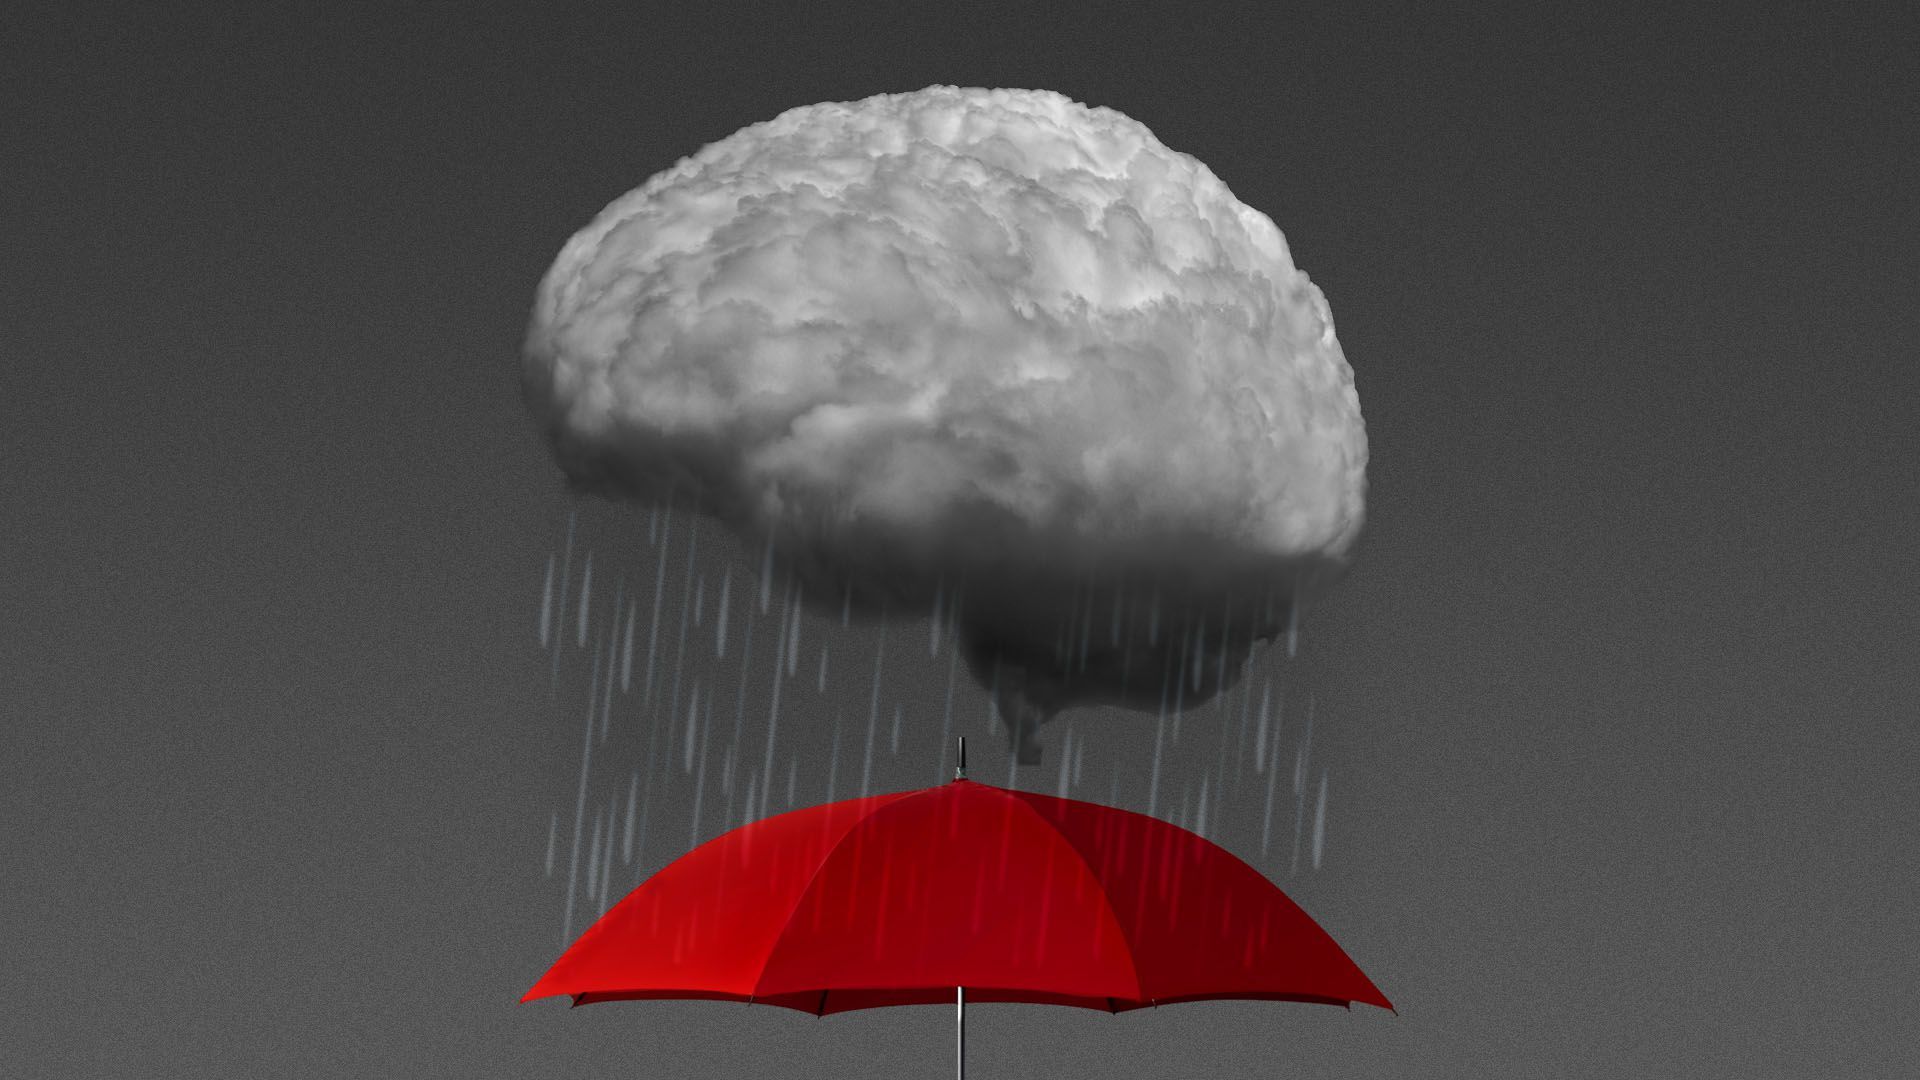 Illustration of a cloud in the shape of a brain raining on an open umbrella